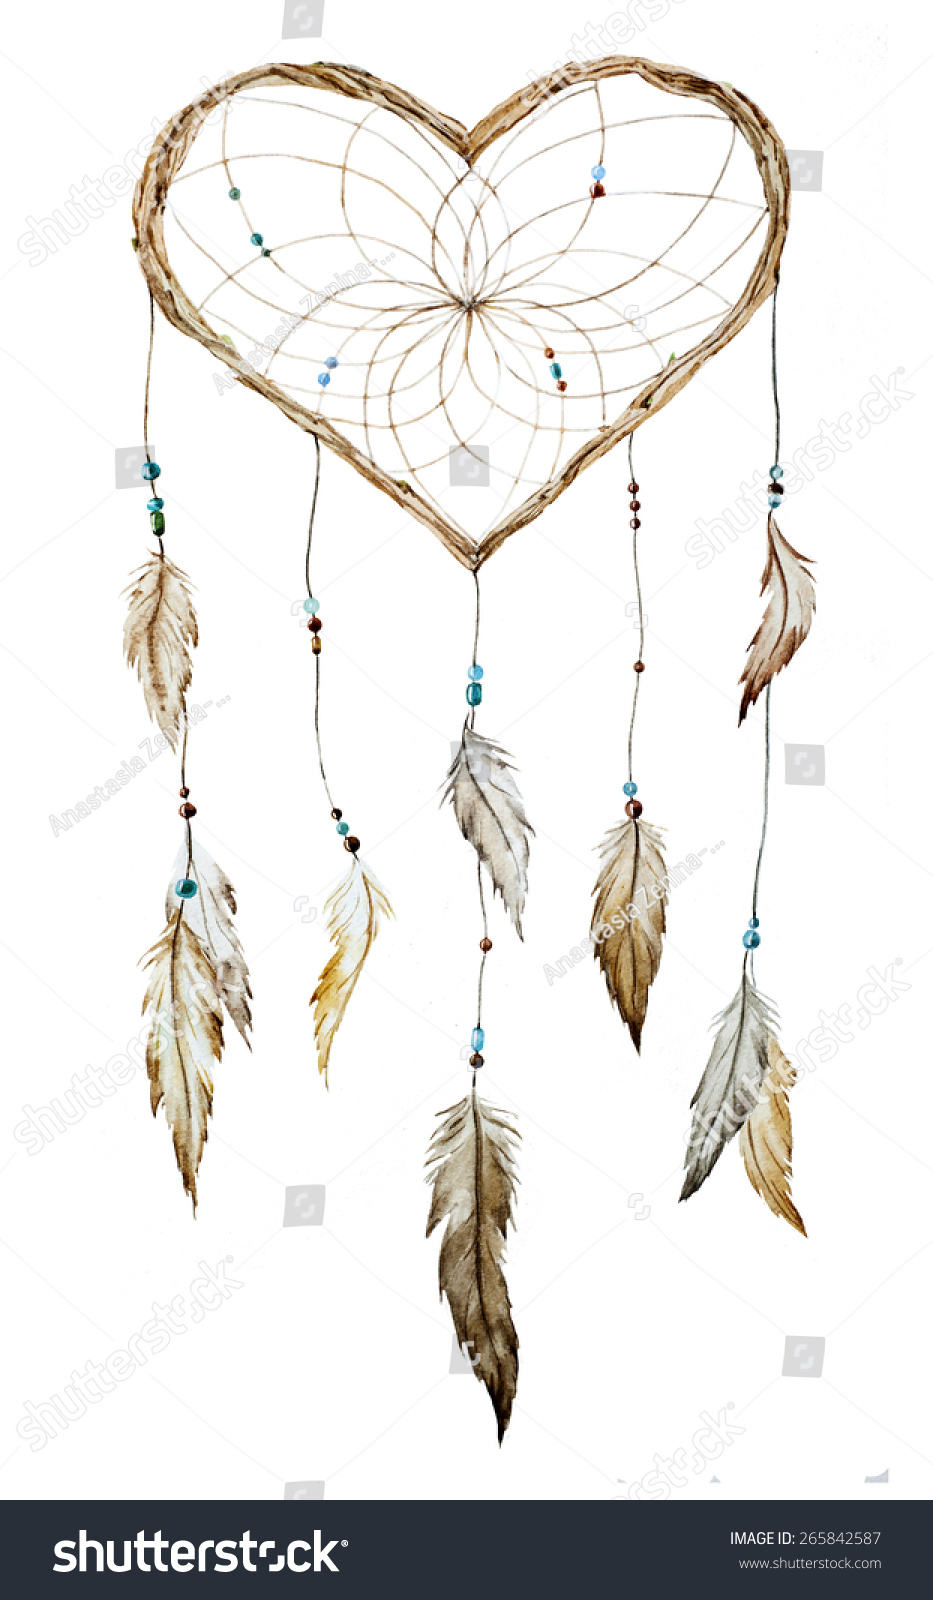 Watercolor Drawing Dream Catcher Feathers Heart Stock ...